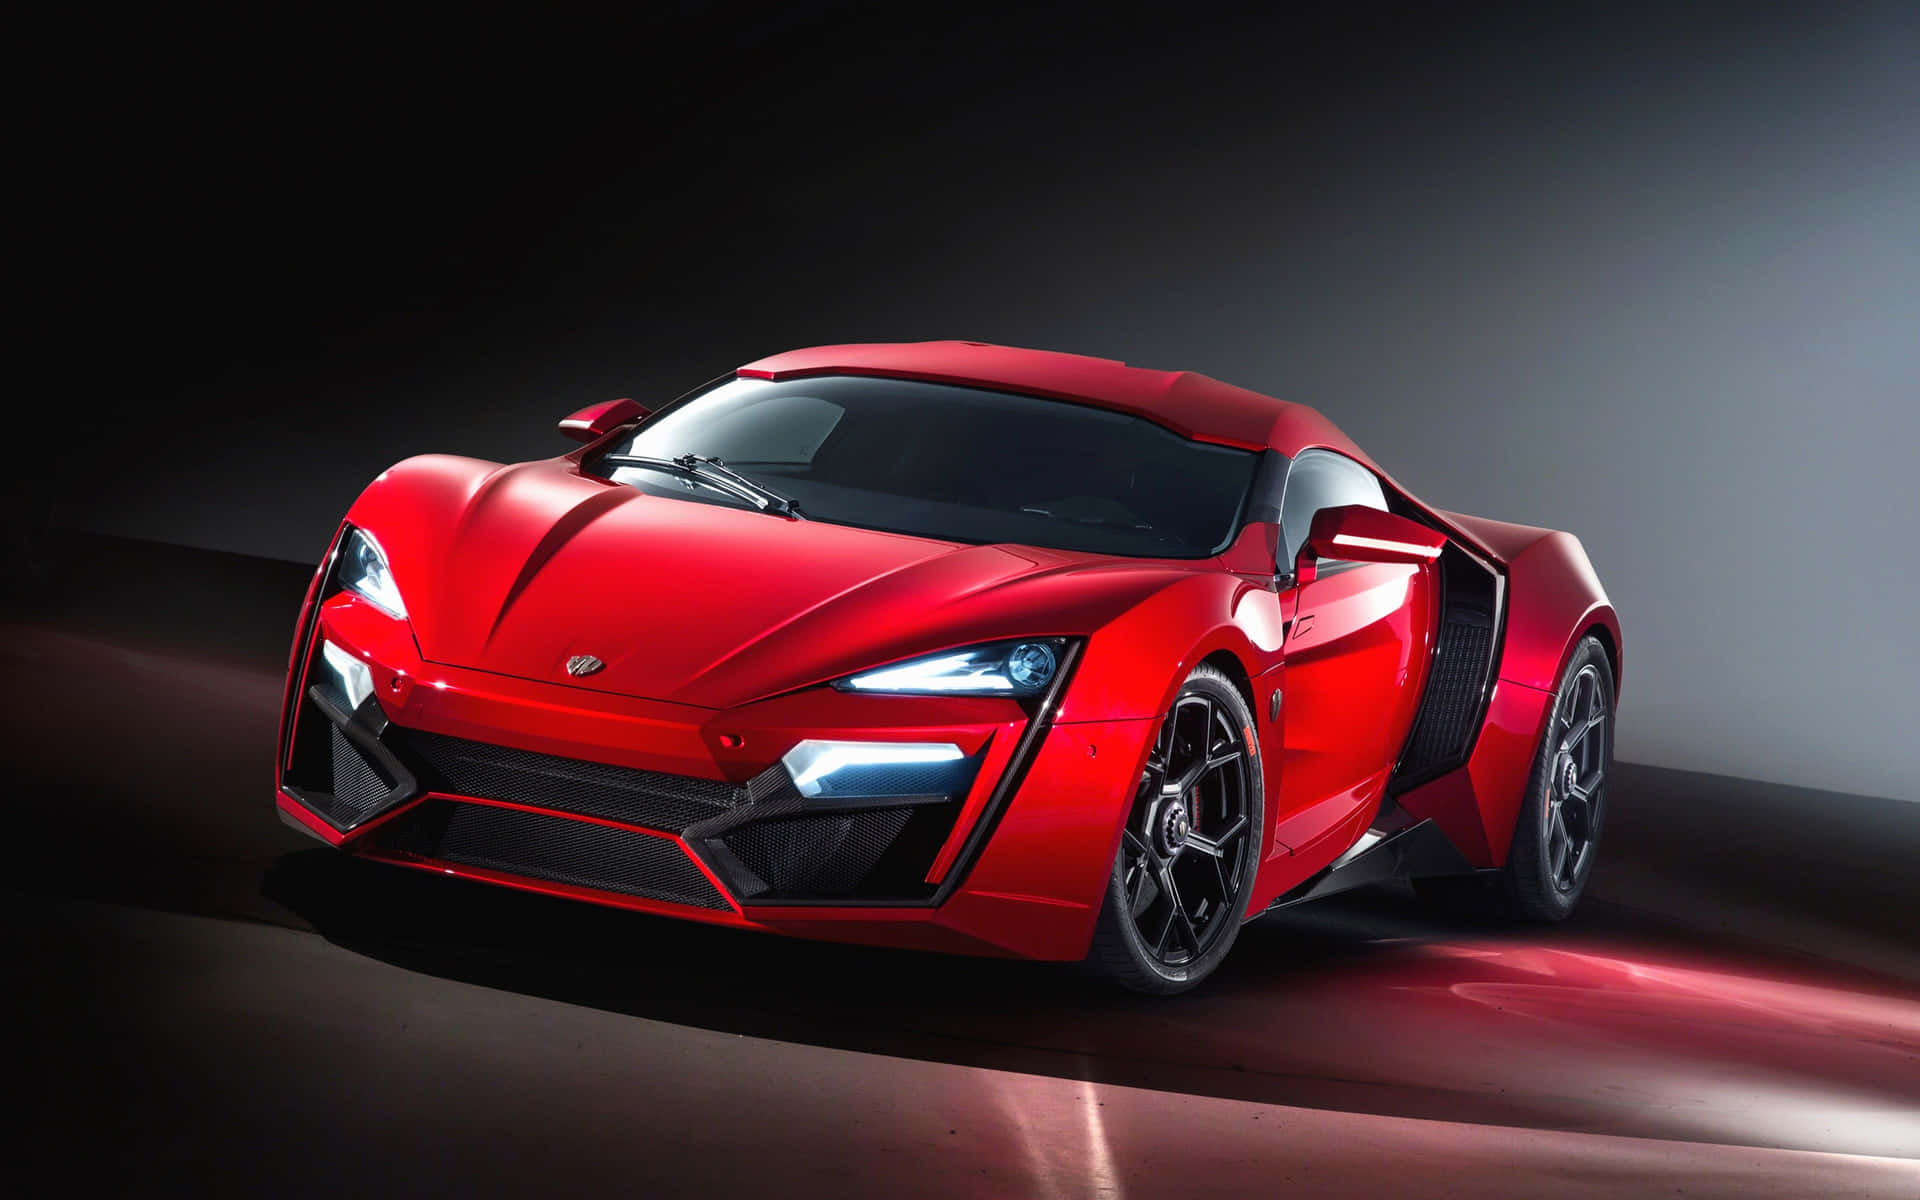 A Red Sports Car Is Shown In A Dark Room Wallpaper